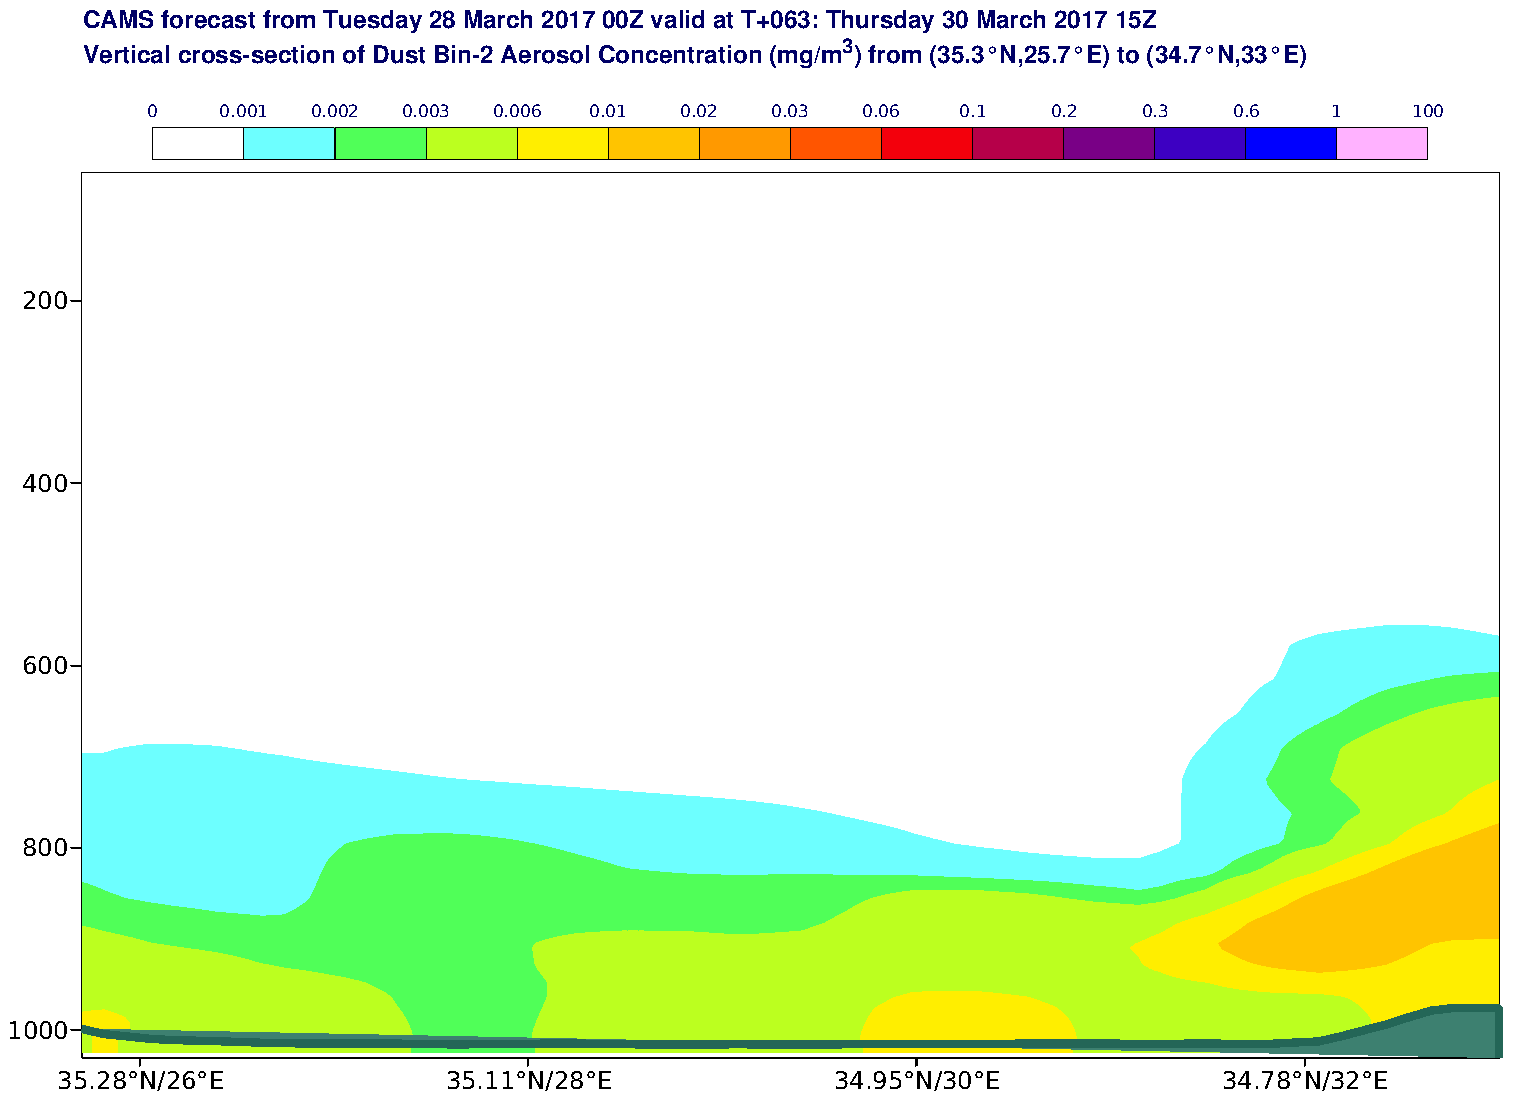 Vertical cross-section of Dust Bin-2 Aerosol Concentration (mg/m3) valid at T63 - 2017-03-30 15:00